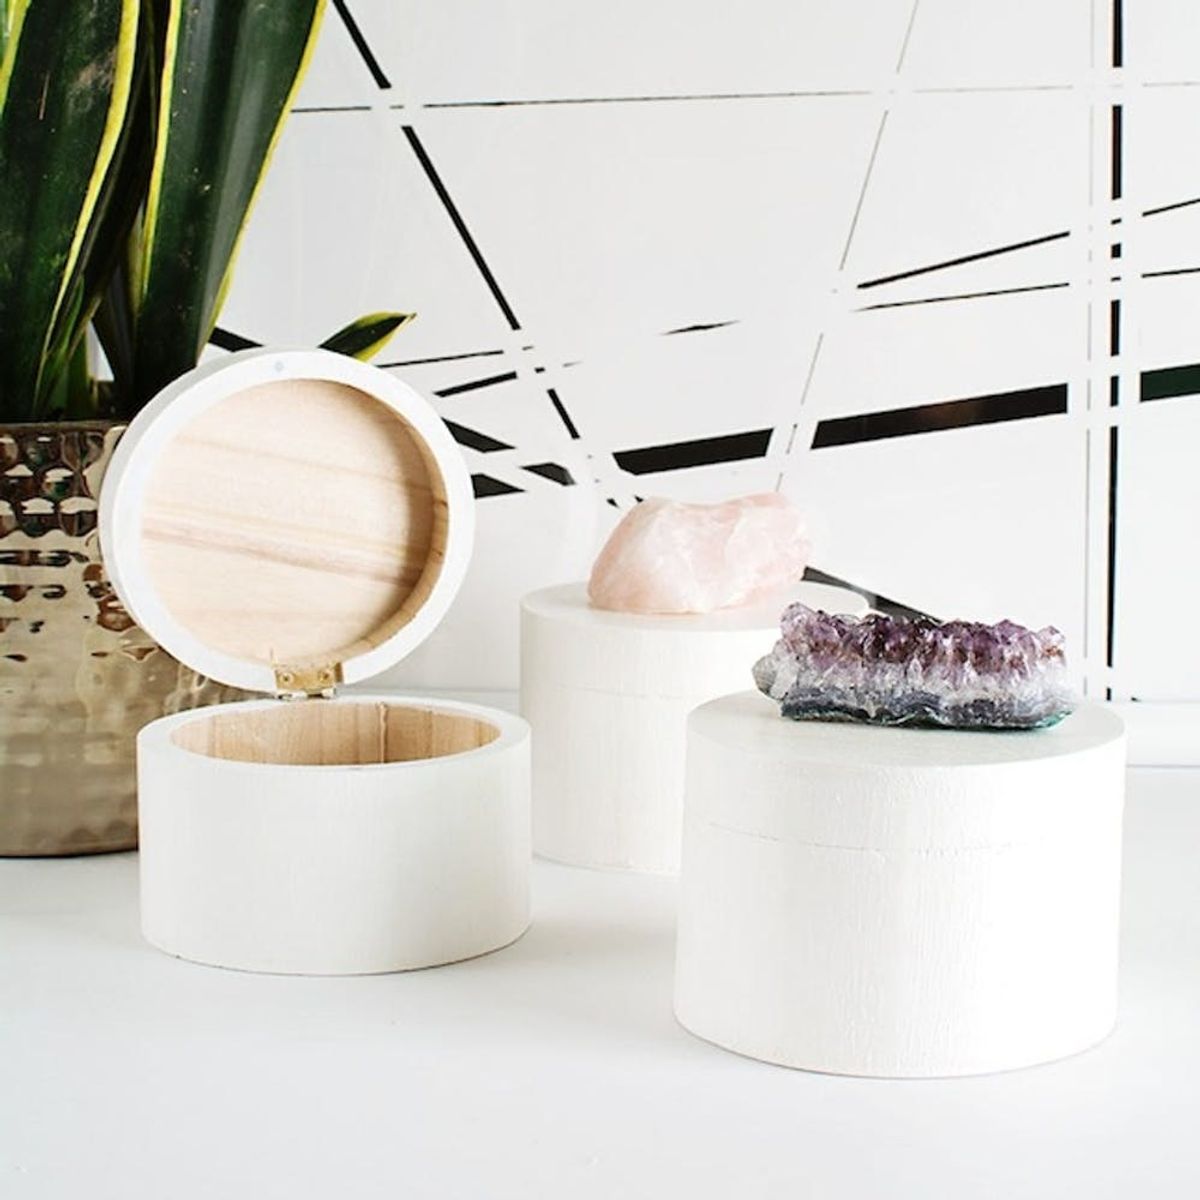 What to Make This Weekend: Crystal Knob Boxes, Truffle Bingo + More